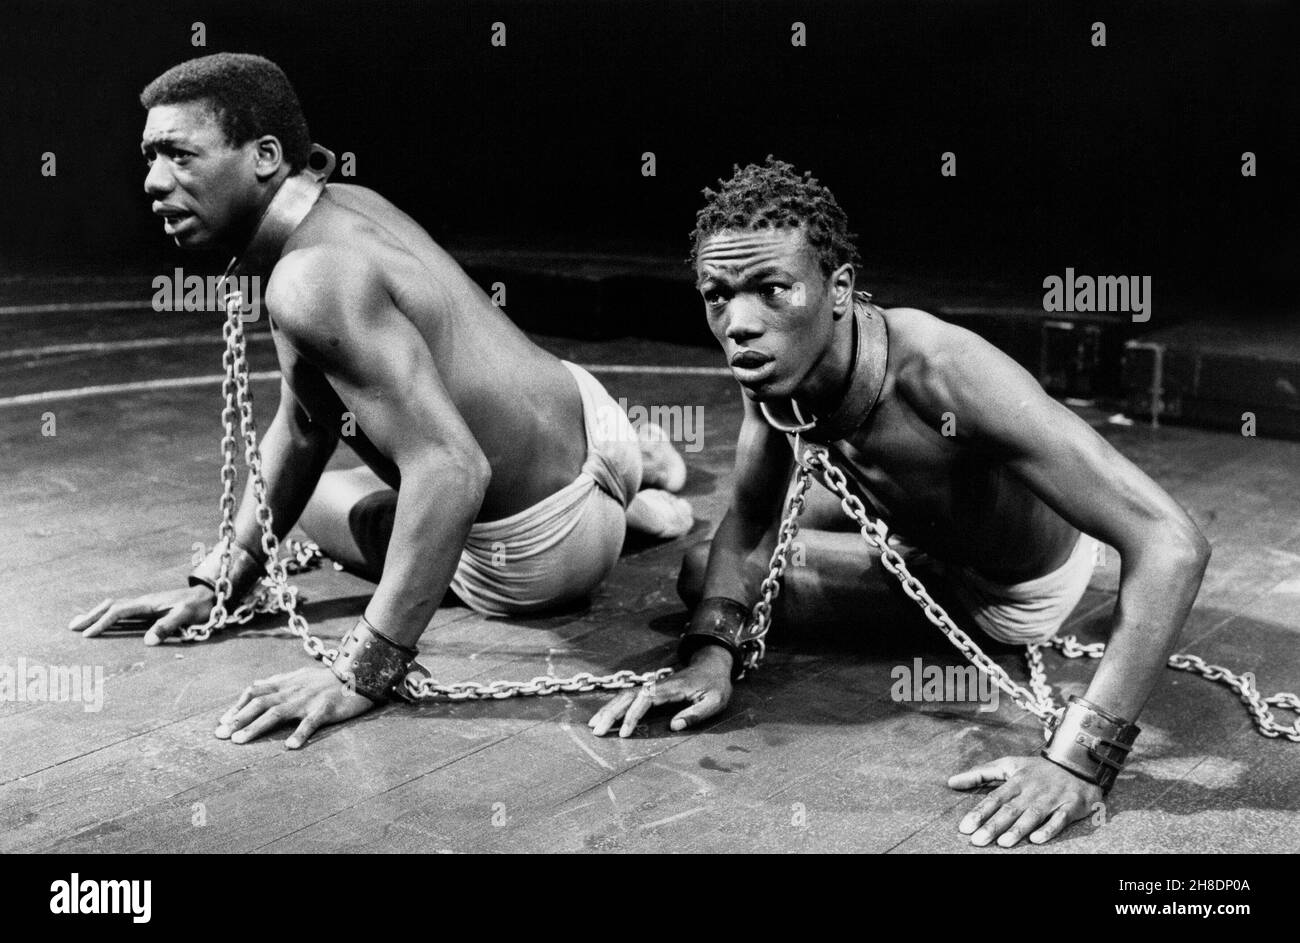 l-r: Hakeem Kae-Kazim (Ide), Carlton Chance (Mobote) in INDIGO by Heidi Thomas at the Royal Shakespeare Company (RSC), The Other Place, Stratford-upon-Avon  08/07/1987  design: Roger Glossop  lighting: Paul Denby  director: Sarah Pia Anderson Stock Photo